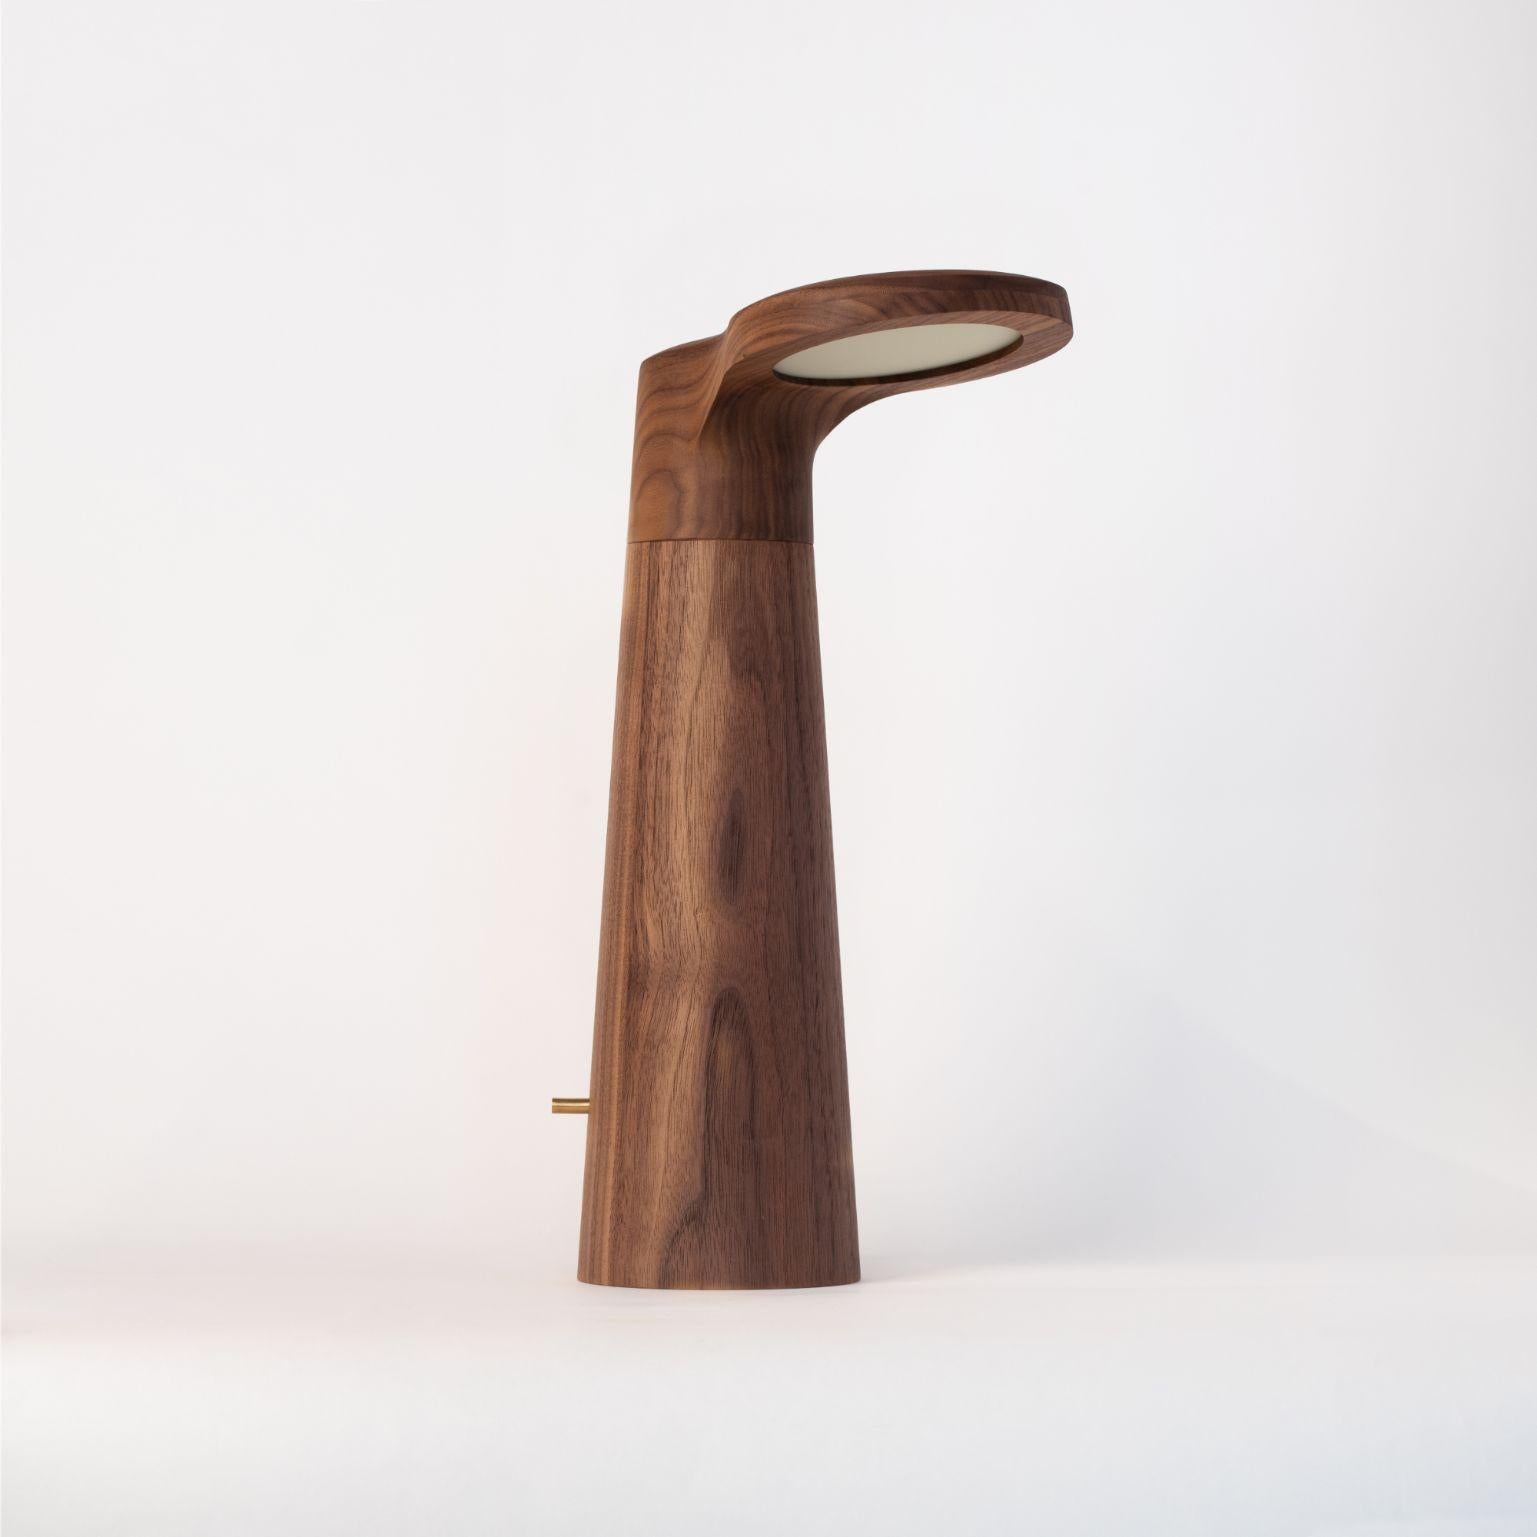 Canaletto walnut - studio light by Isato Prugger
Dimensions: 37 x 22 x 13 cm
Materials: Canaletto walnut
Limited edition of 100

Also available inwenge wood, olive wood, padouk, oak, white ash. All our lamps can be wired according to each